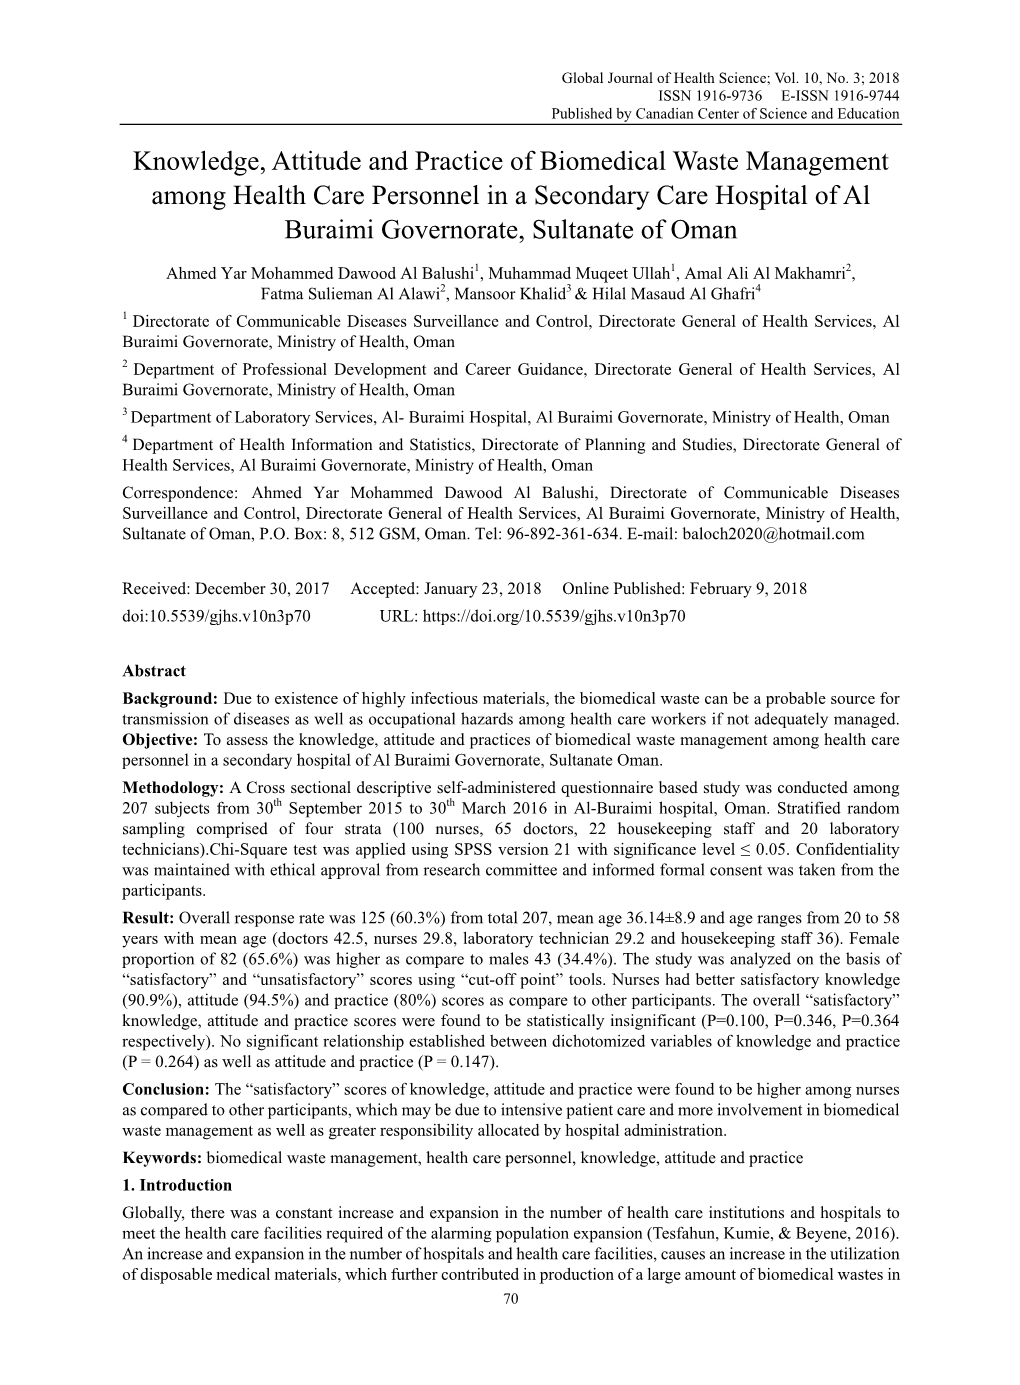 Knowledge, Attitude and Practice of Biomedical Waste Management Among Health Care Personnel in a Secondary Care Hospital of Al Buraimi Governorate, Sultanate of Oman